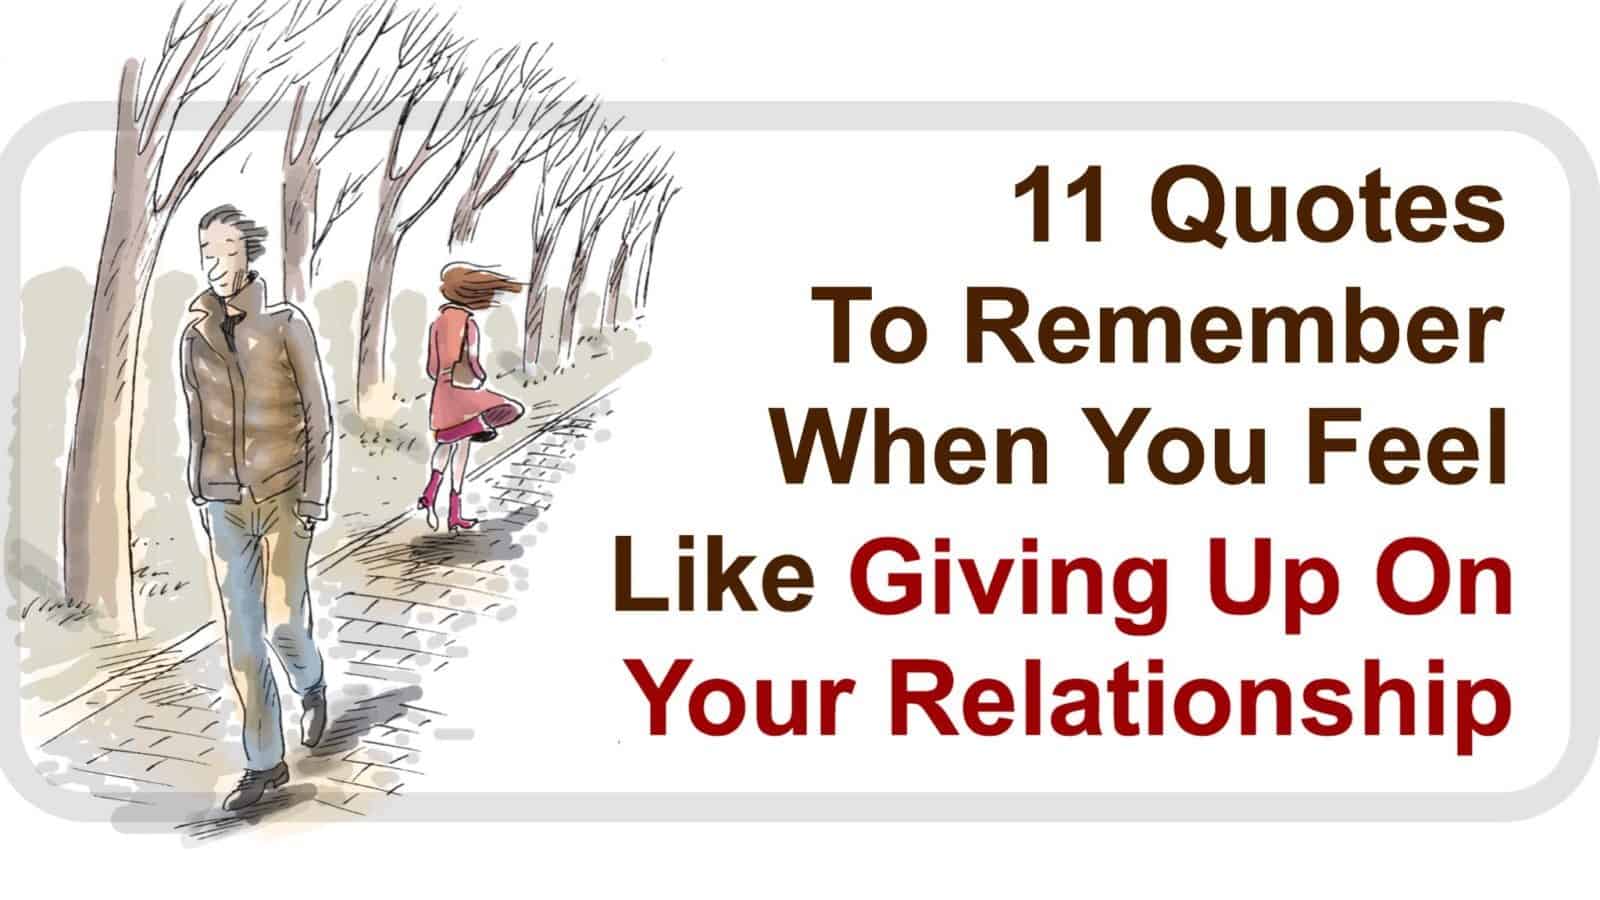 Feel your up relationship like giving when on you What to